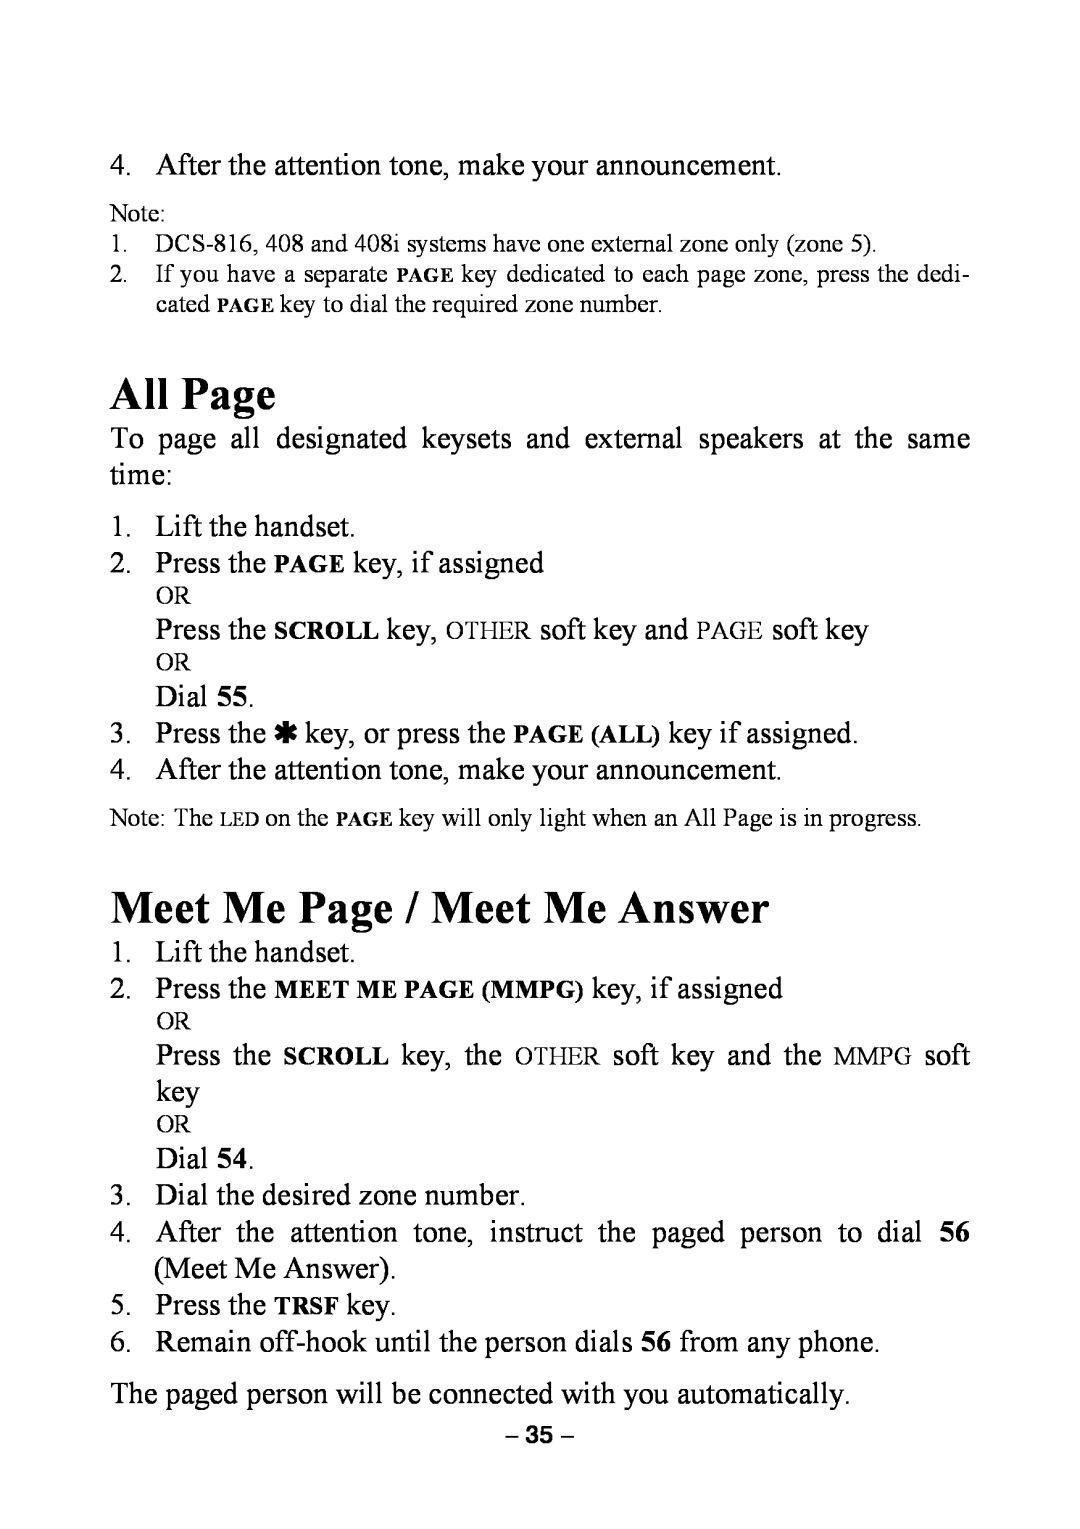 Samsung DCS KEYSET manual All Page, Meet Me Page / Meet Me Answer 